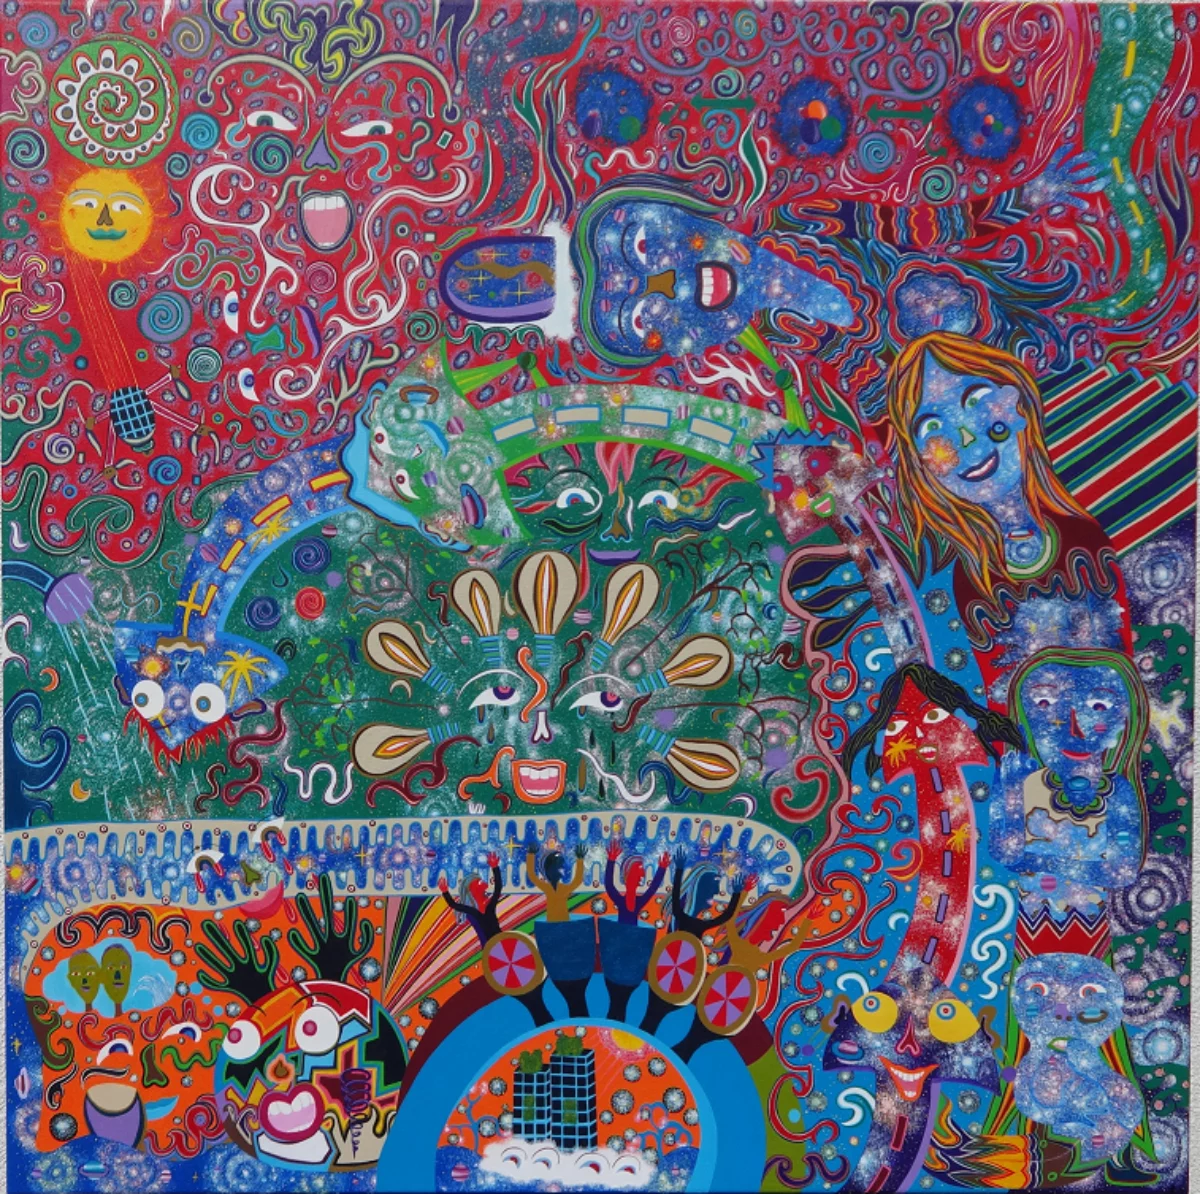 A painting. An interlocking of shapes from light bulbs, streets, a watering can, musical instruments, ornaments and faces alienated in the coloring.